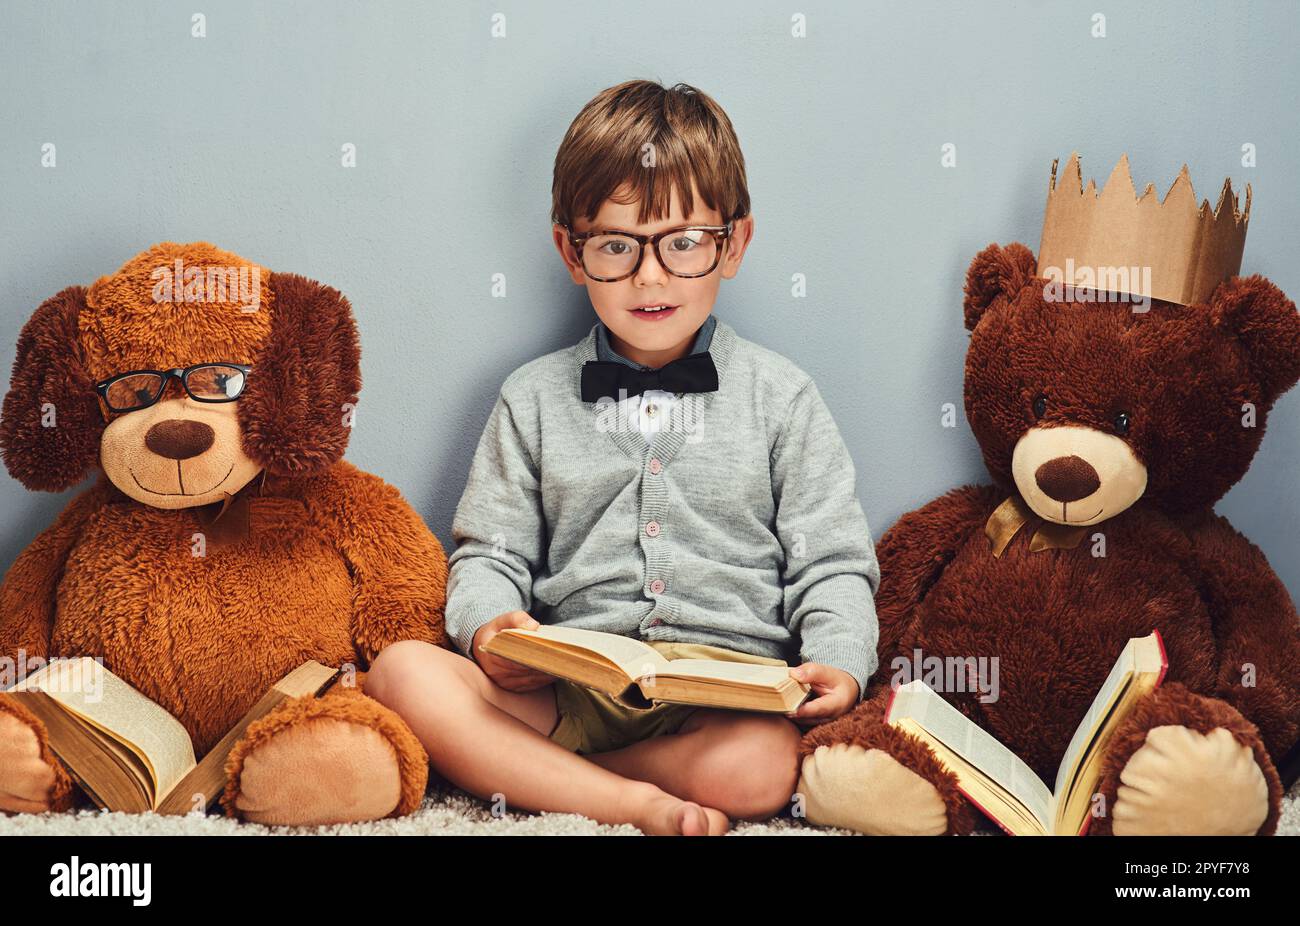 We all read together. Studio portrait of a smart little boy reading a book next to his teddy bears against a gray background. Stock Photo